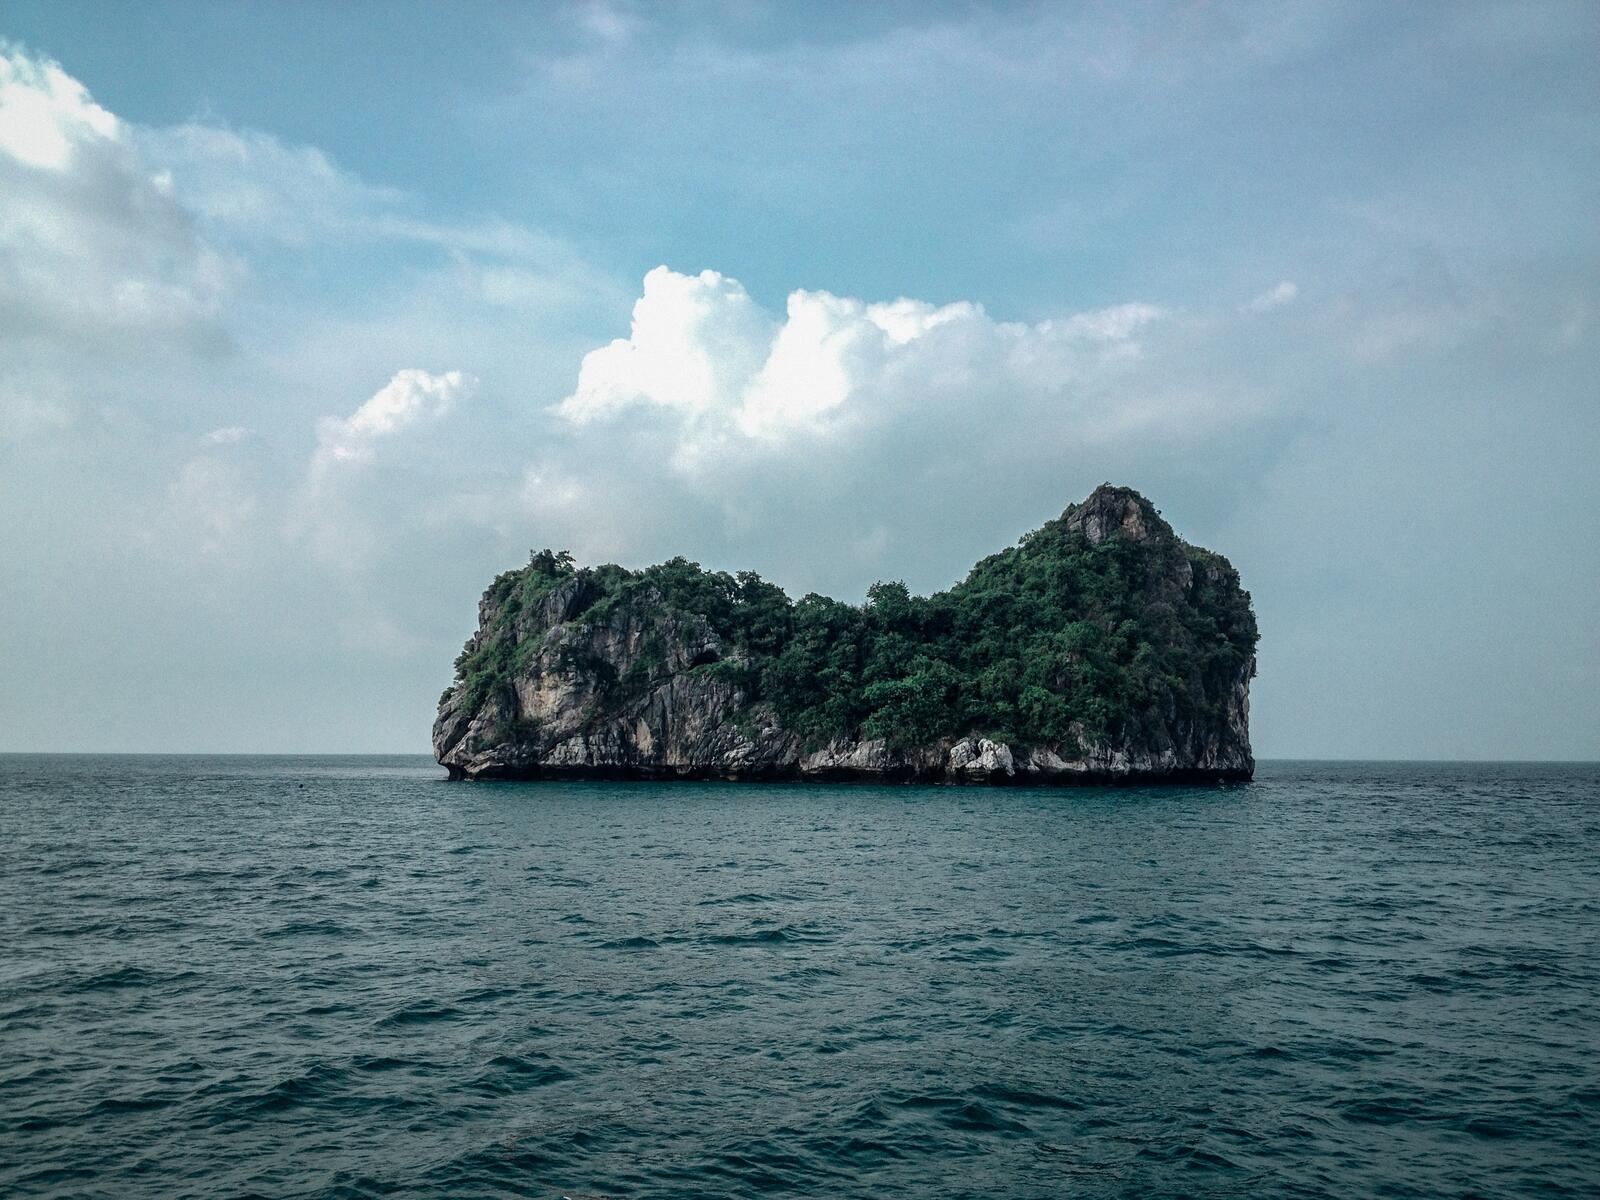 Free photo An island in the middle of the sea in the form of a rock with trees on it